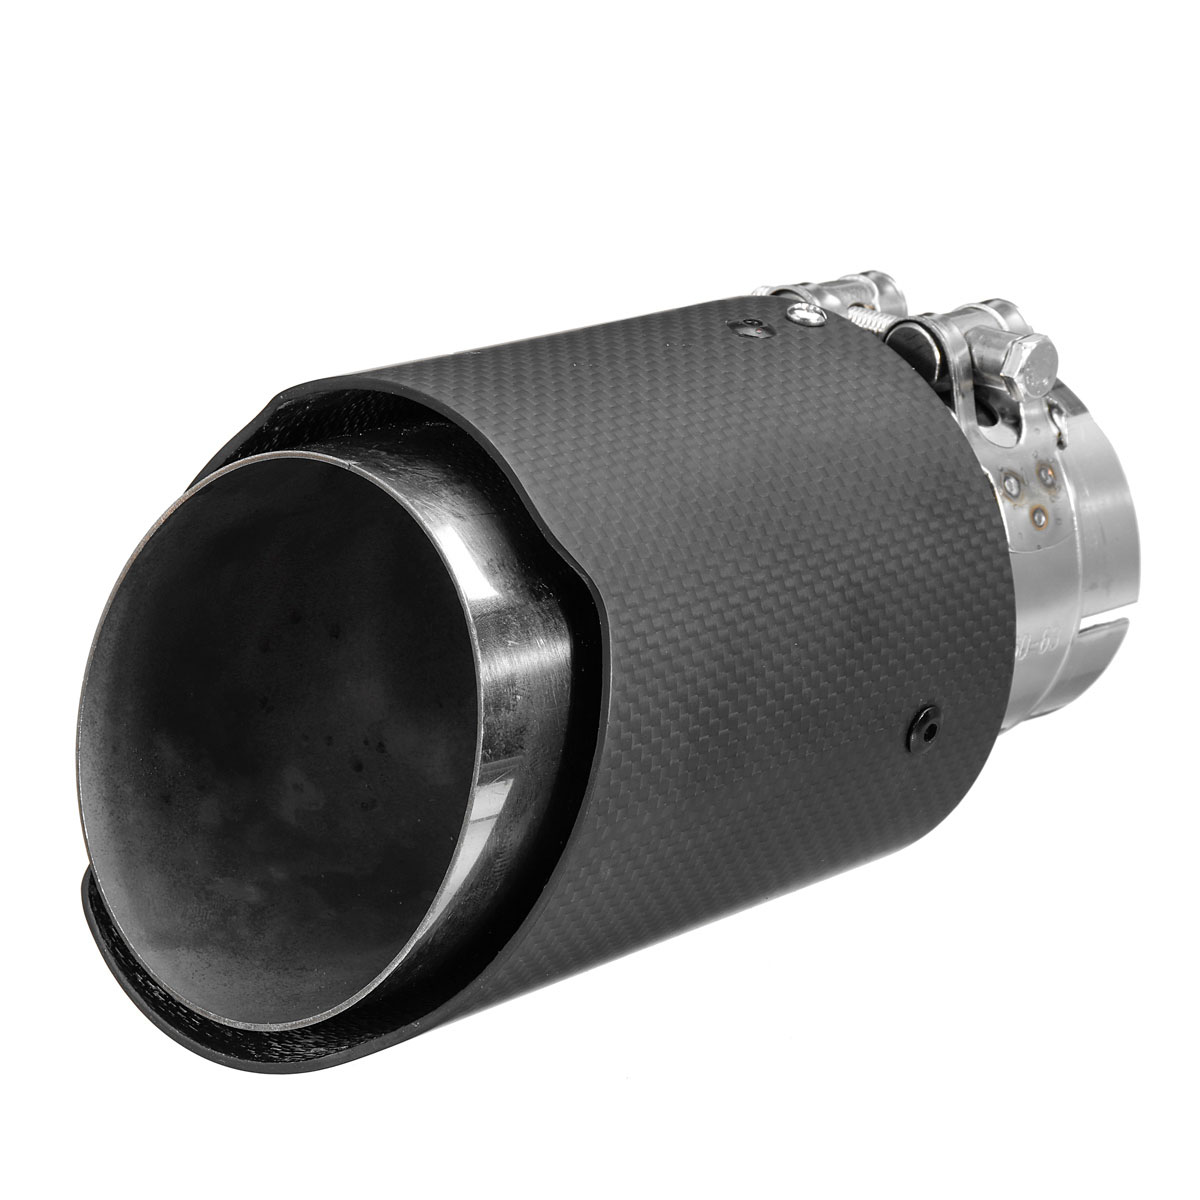 Matte-Carbon-Fiber-Car-Exhaust-Pipe-Tail-Muffler-Tip-LED-Light-63mm-IN-89mm-OUT-1701263